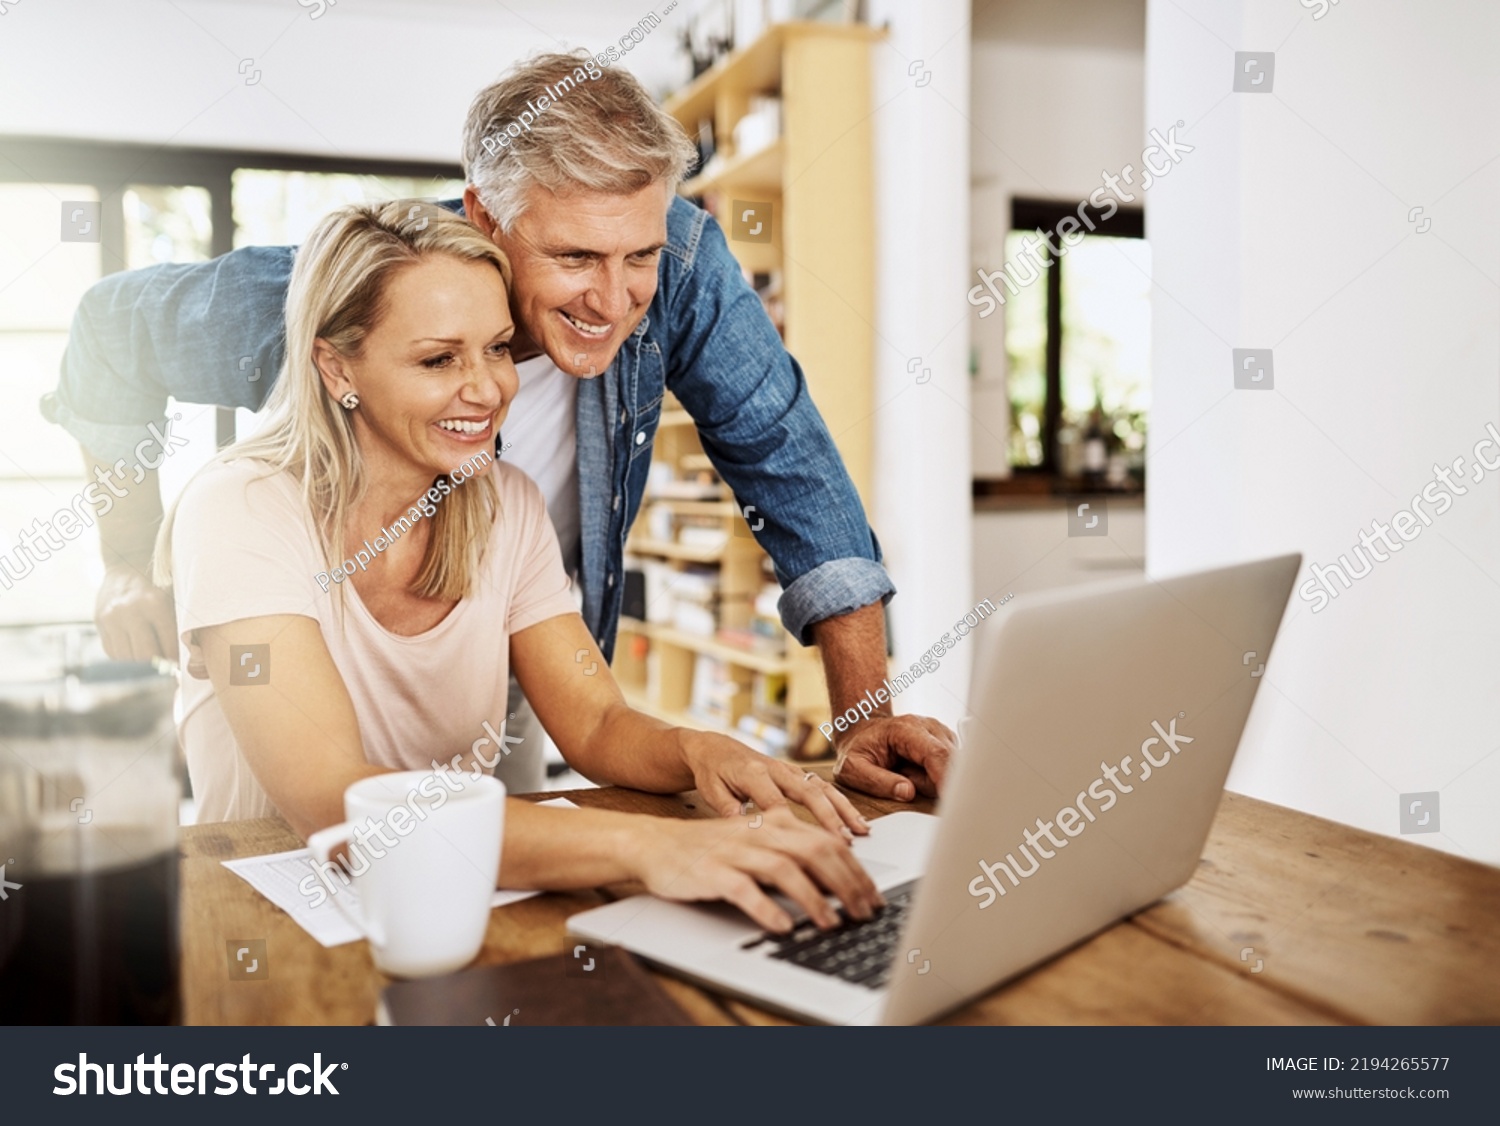 Happy, smiling and mature couple using a laptop together at home. Charming husband assisting wife with online work on the internet. Cheerful Middle aged partners working as a team on social media. #2194265577